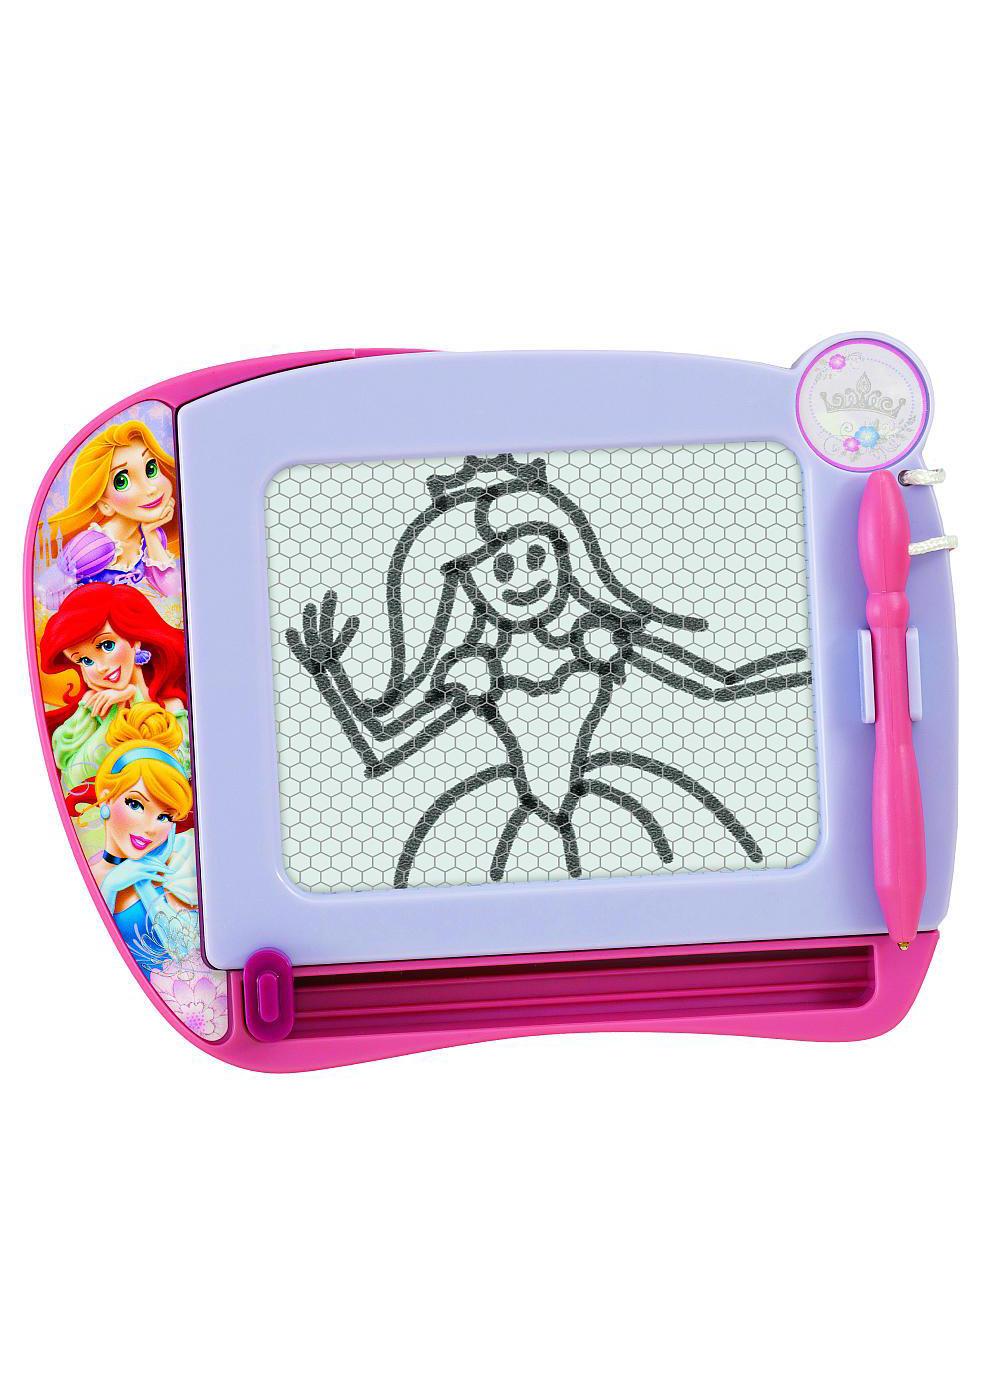 Etch A Sketch 60th Anniversary Mini Pocket Drawing Doodle Art Toy